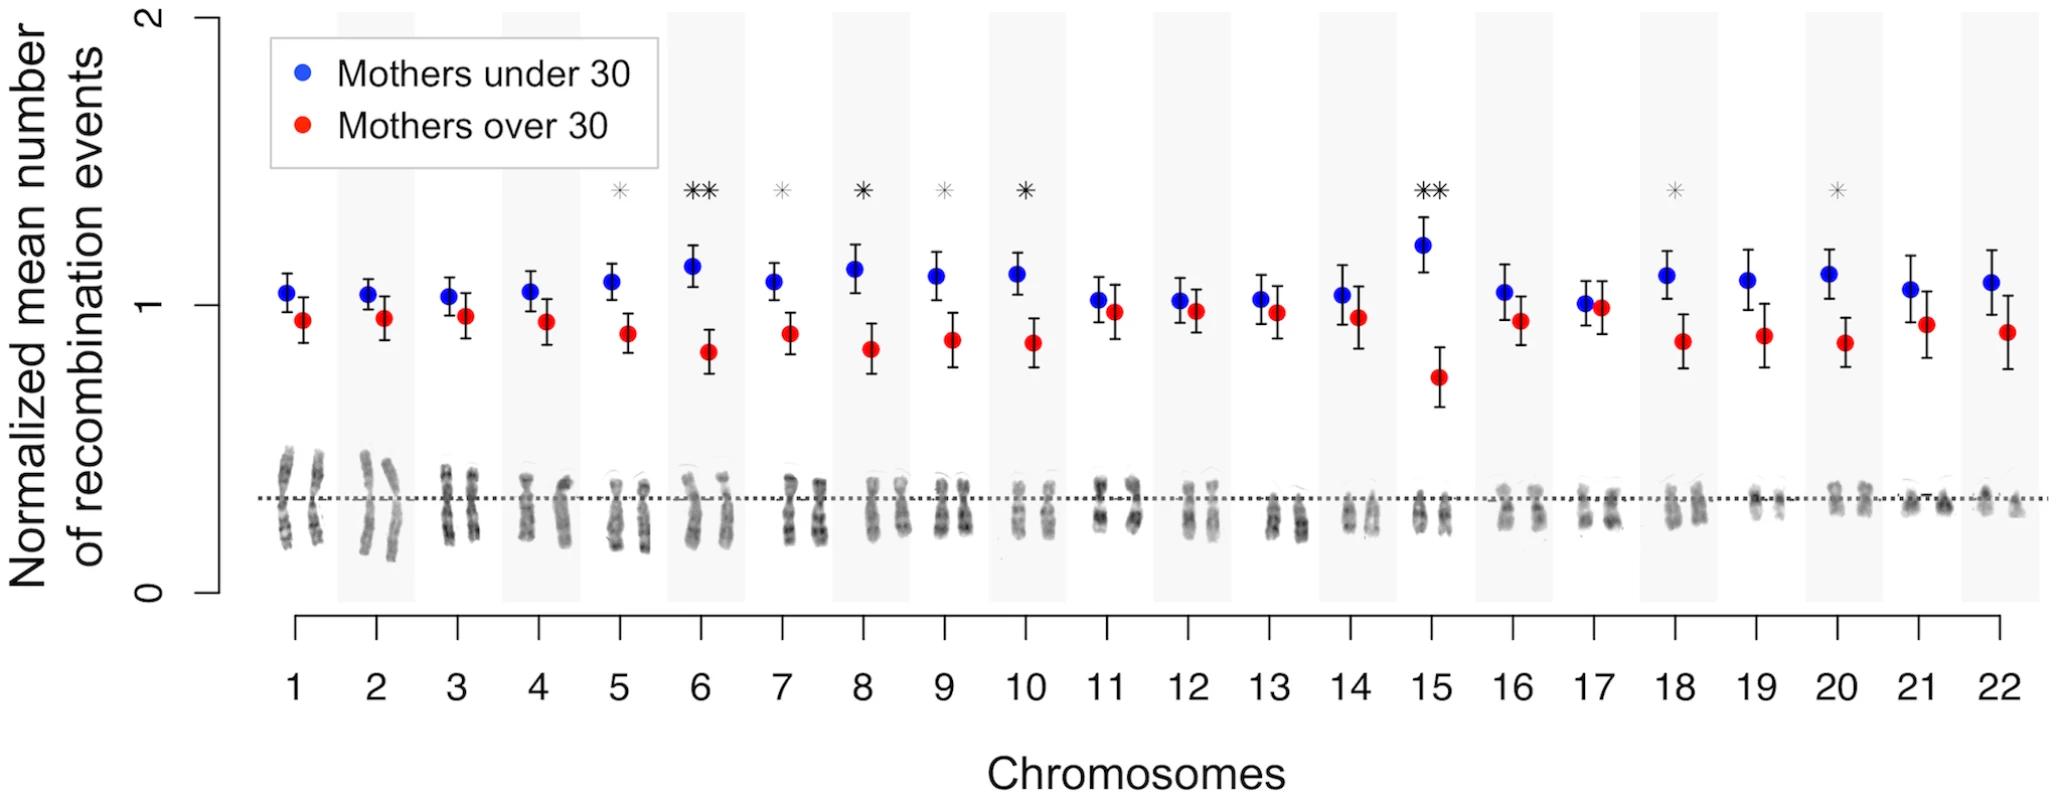 Chromosome-specific shifts in normalized means (and standard errors) of the number of maternal crossovers for mothers under and over 30 years of age.